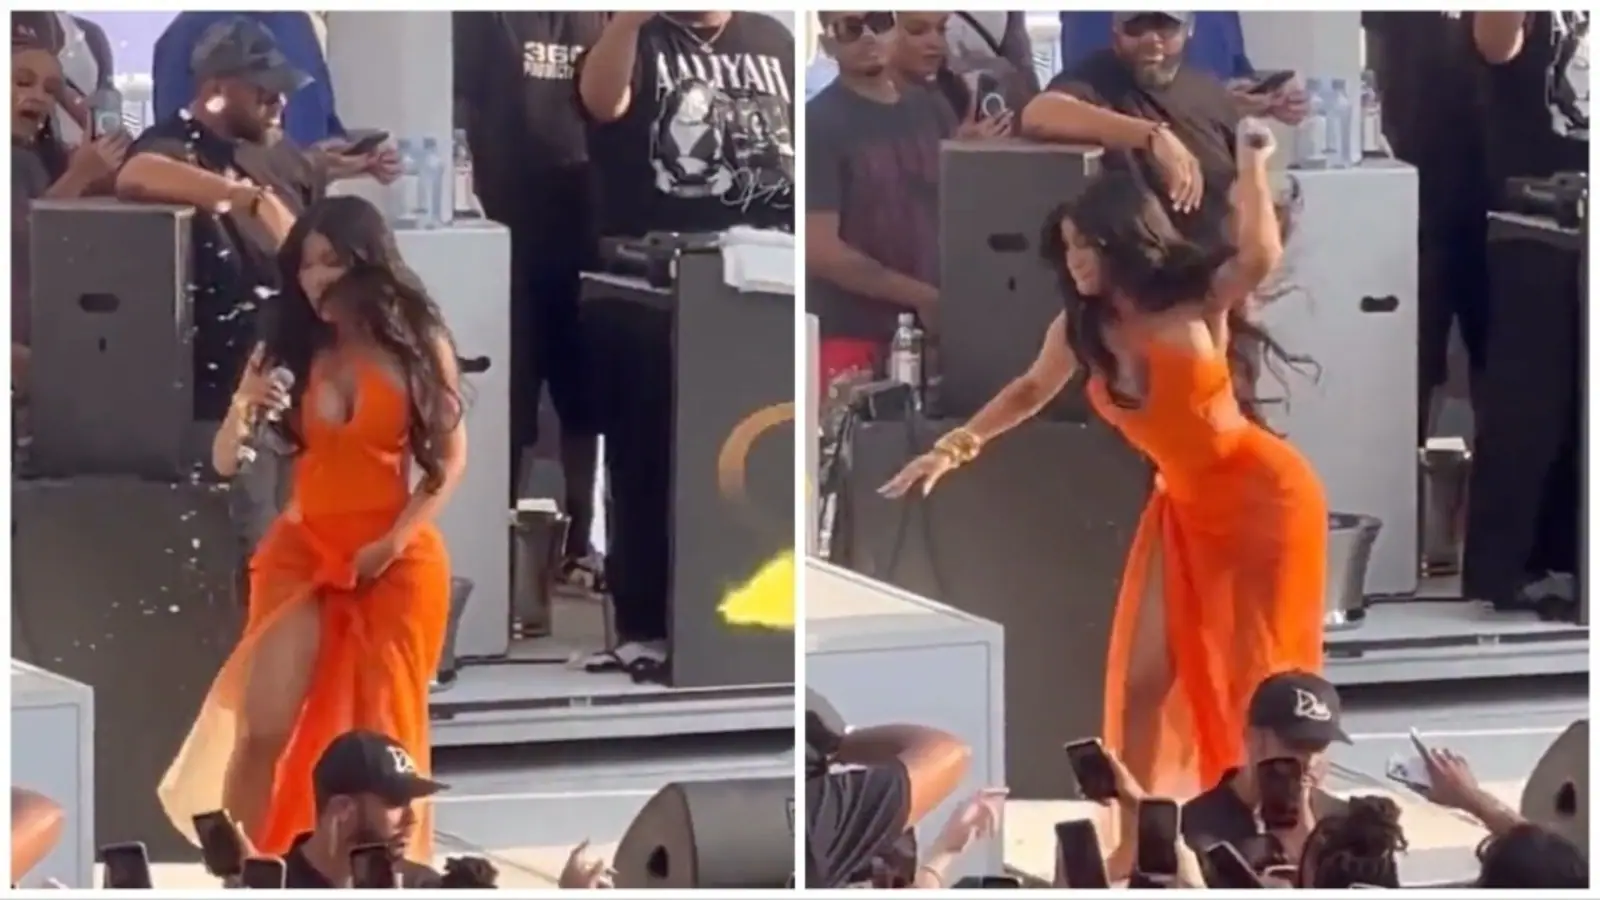 Moment Cardi B Throws Microphone At Fan While Performing On stage (Photos, Video)